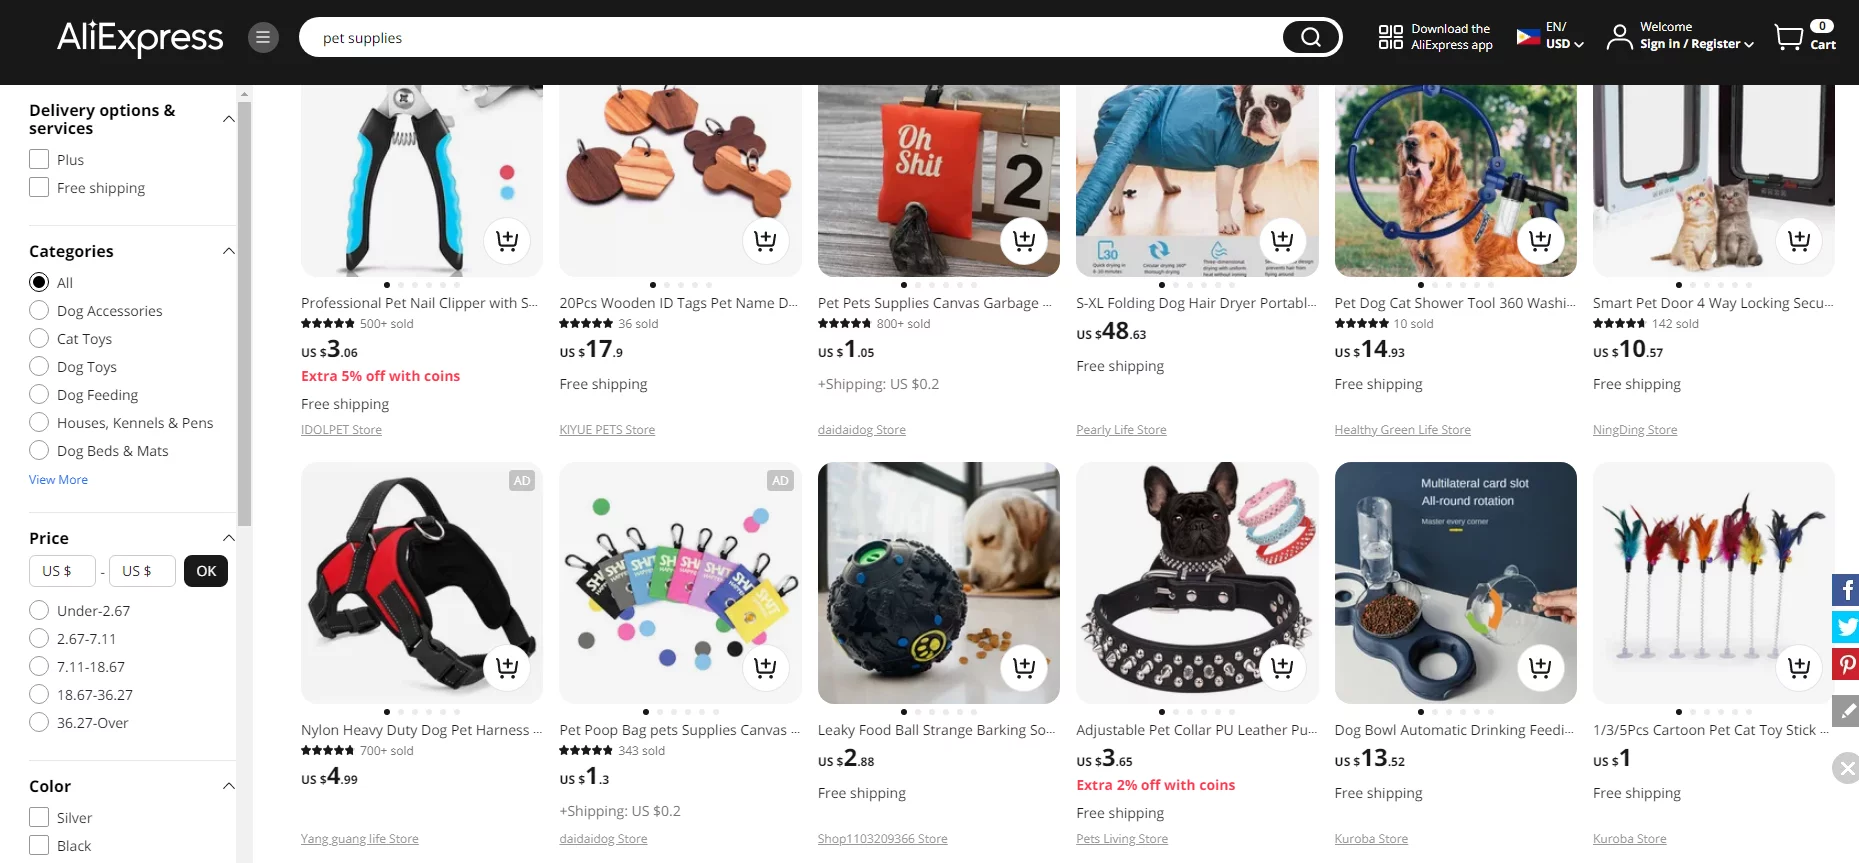 AliExpress – The Best Overall Pet Dropshipping Supplier